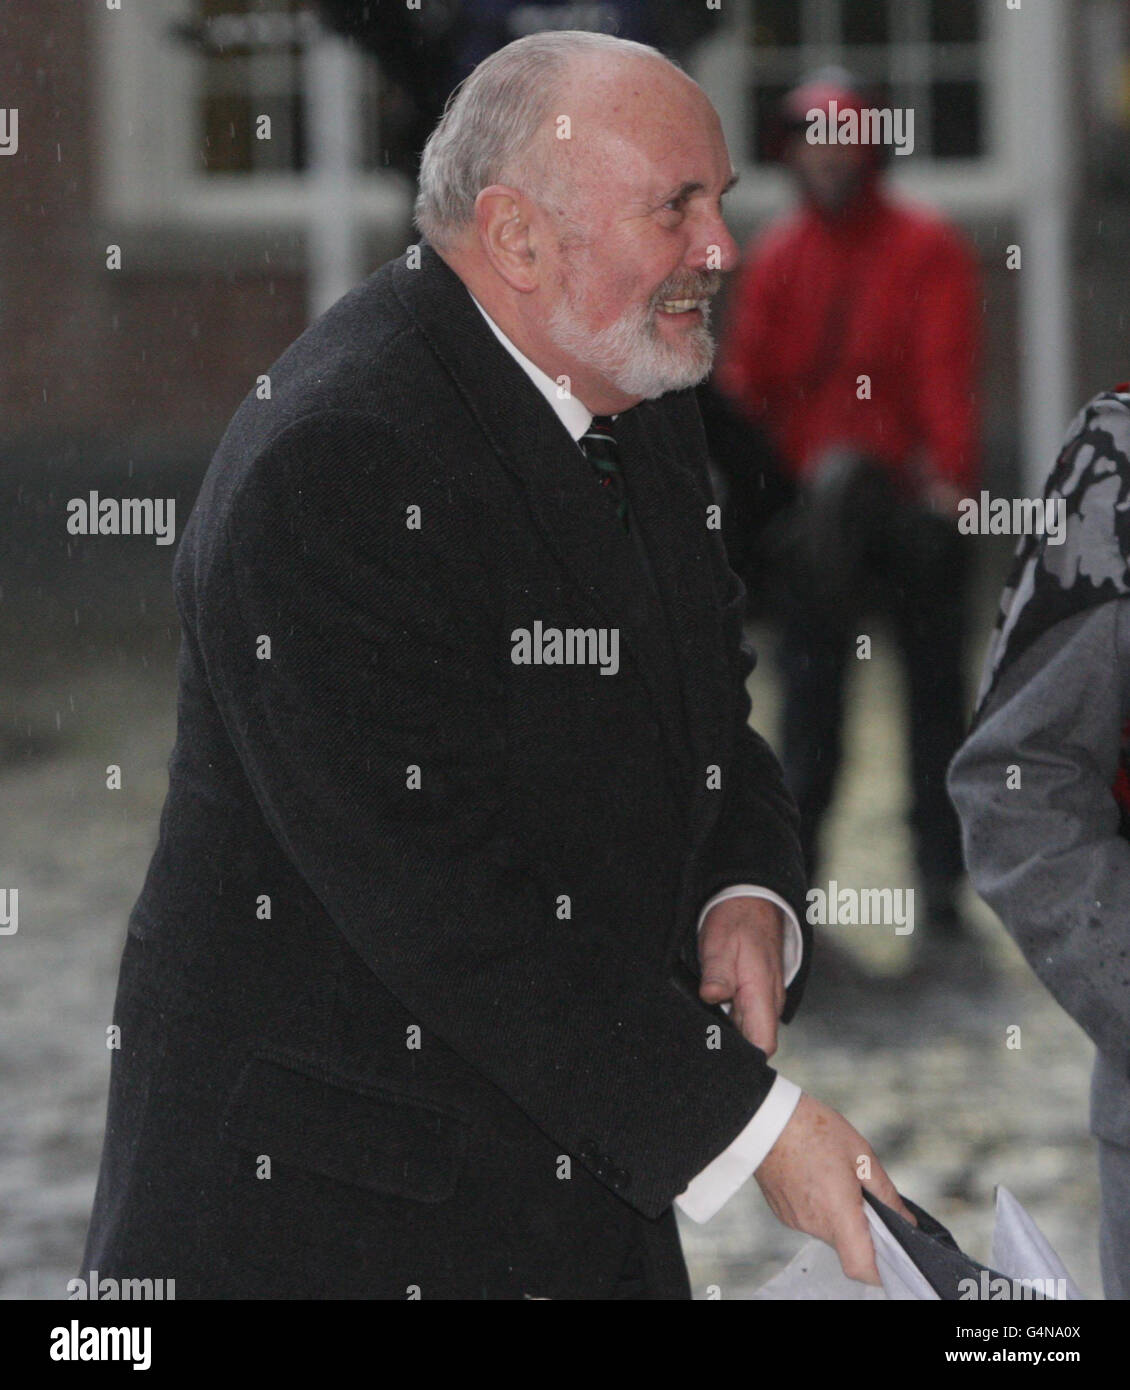 Presidential Candidate David Norris arrives at Dublin Castle for the inauguration ceremony of President-elect Michael D Higgins as Ireland's ninth head of state today. PRESS ASSOCIATION. Picture date: Friday November 11, 2011. See PA story IRISH President. Photo credit should read: Niall Carson/PA Wire Stock Photo